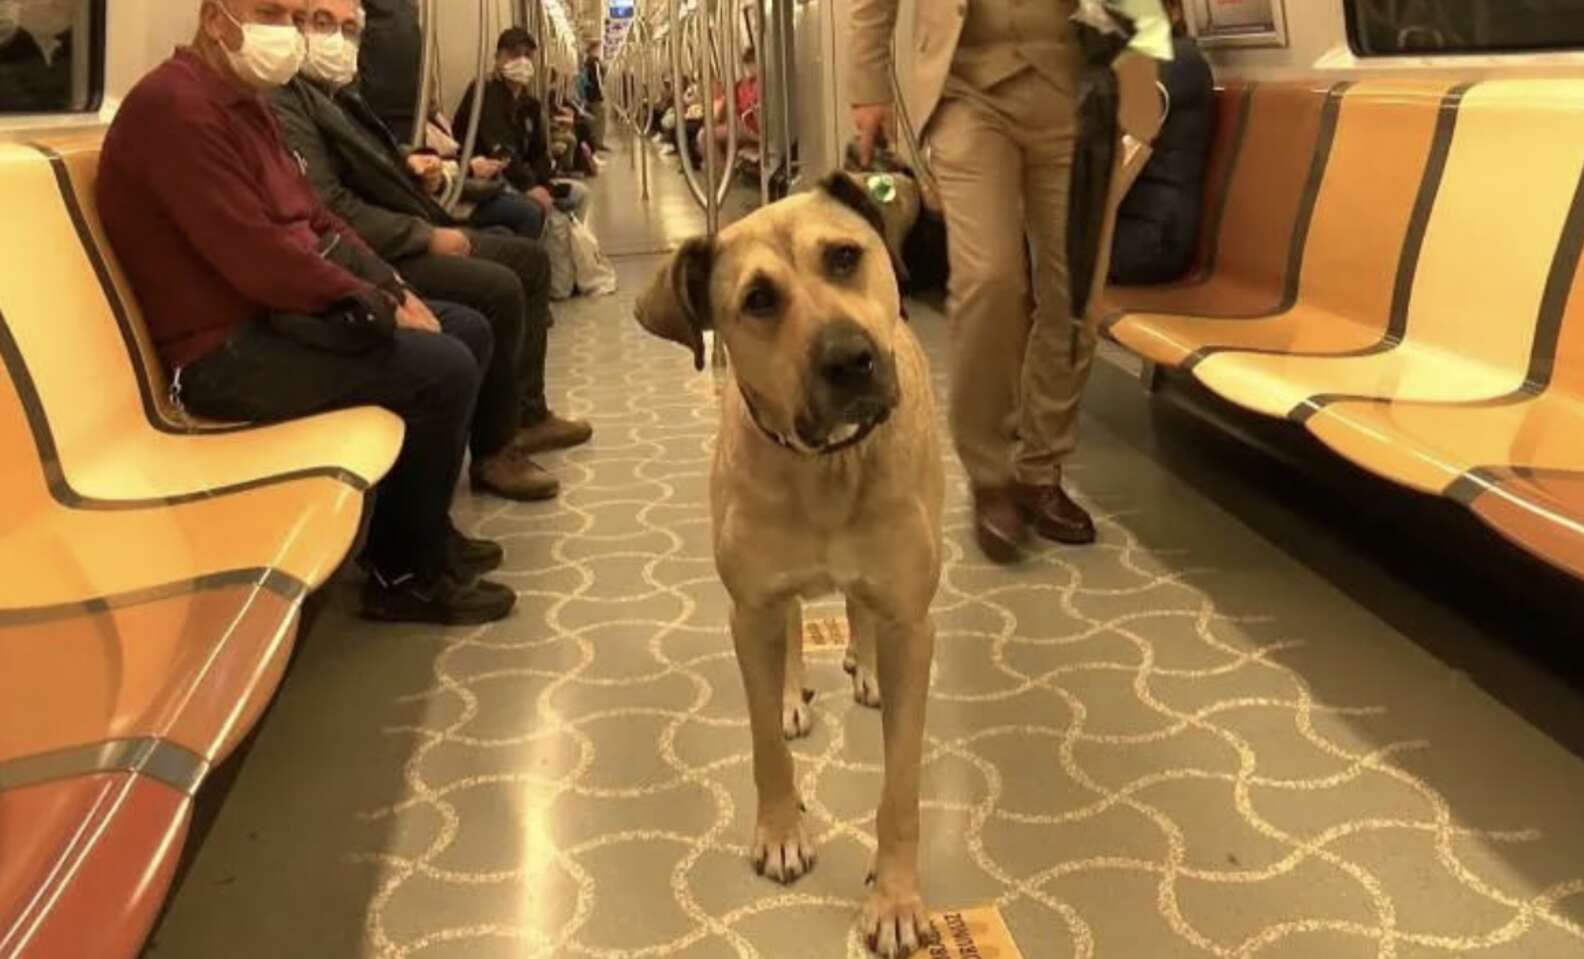 Stray Dog Brightens Istanbul Daily Commute